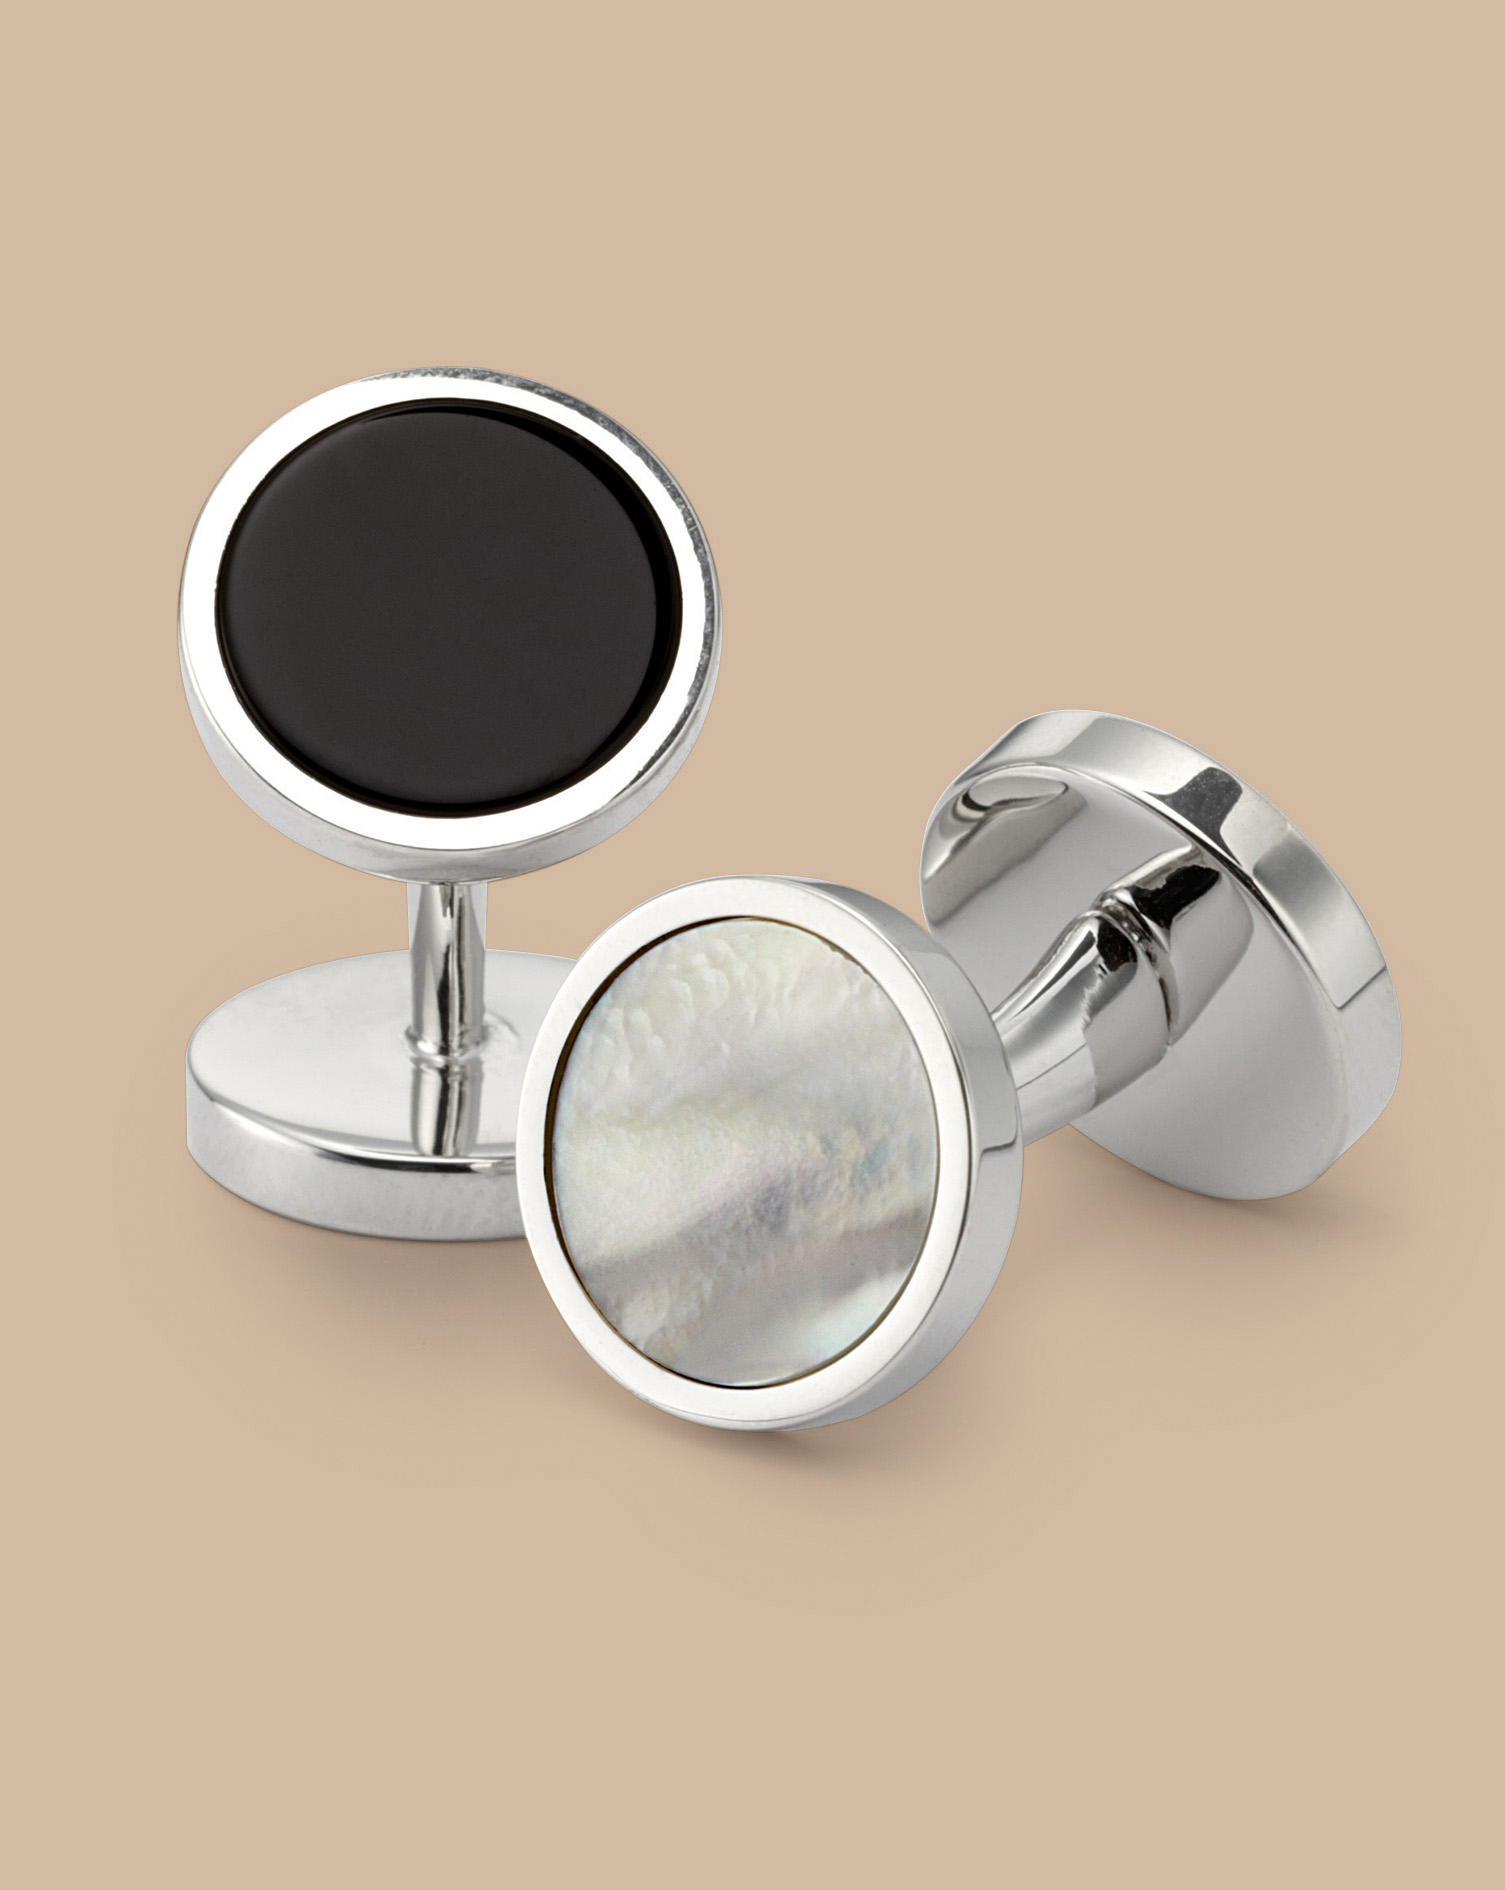 Men's Charles Tyrwhitt Mother Of Pearl and Onyx Evening Cufflinks - Silver Grey
